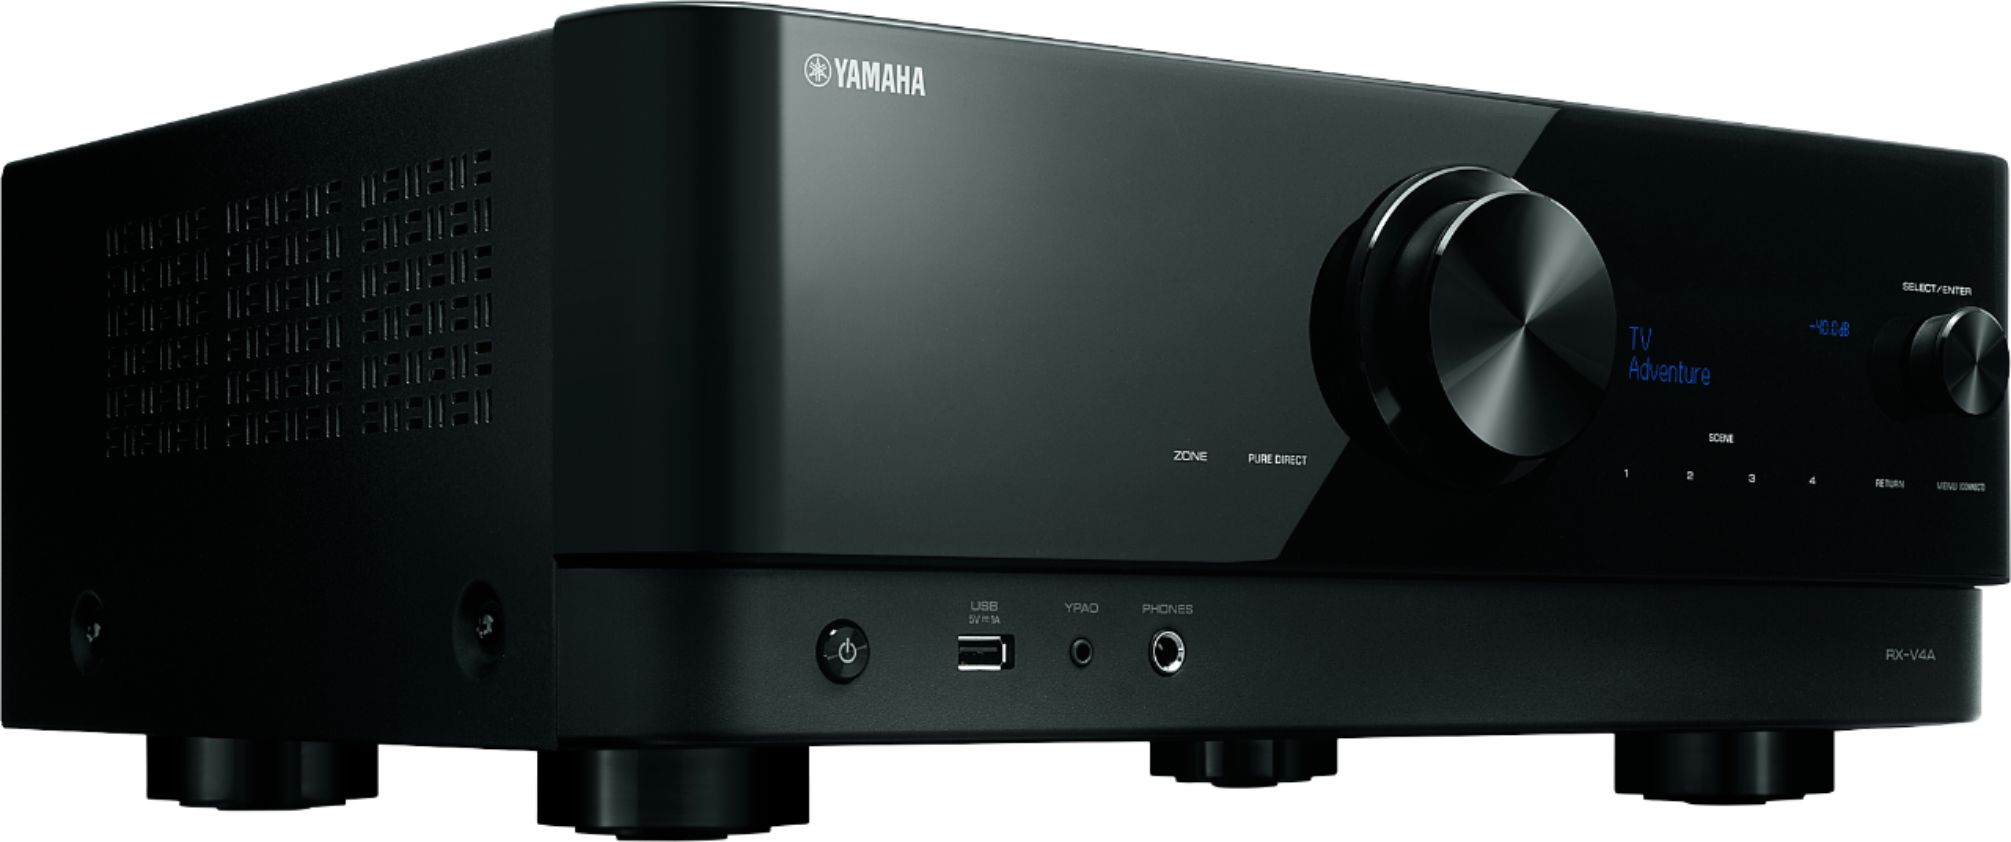 Angle View: Yamaha - RX-V4A 5.2-channel AV Receiver with 8K HDMI and MusicCast - Black